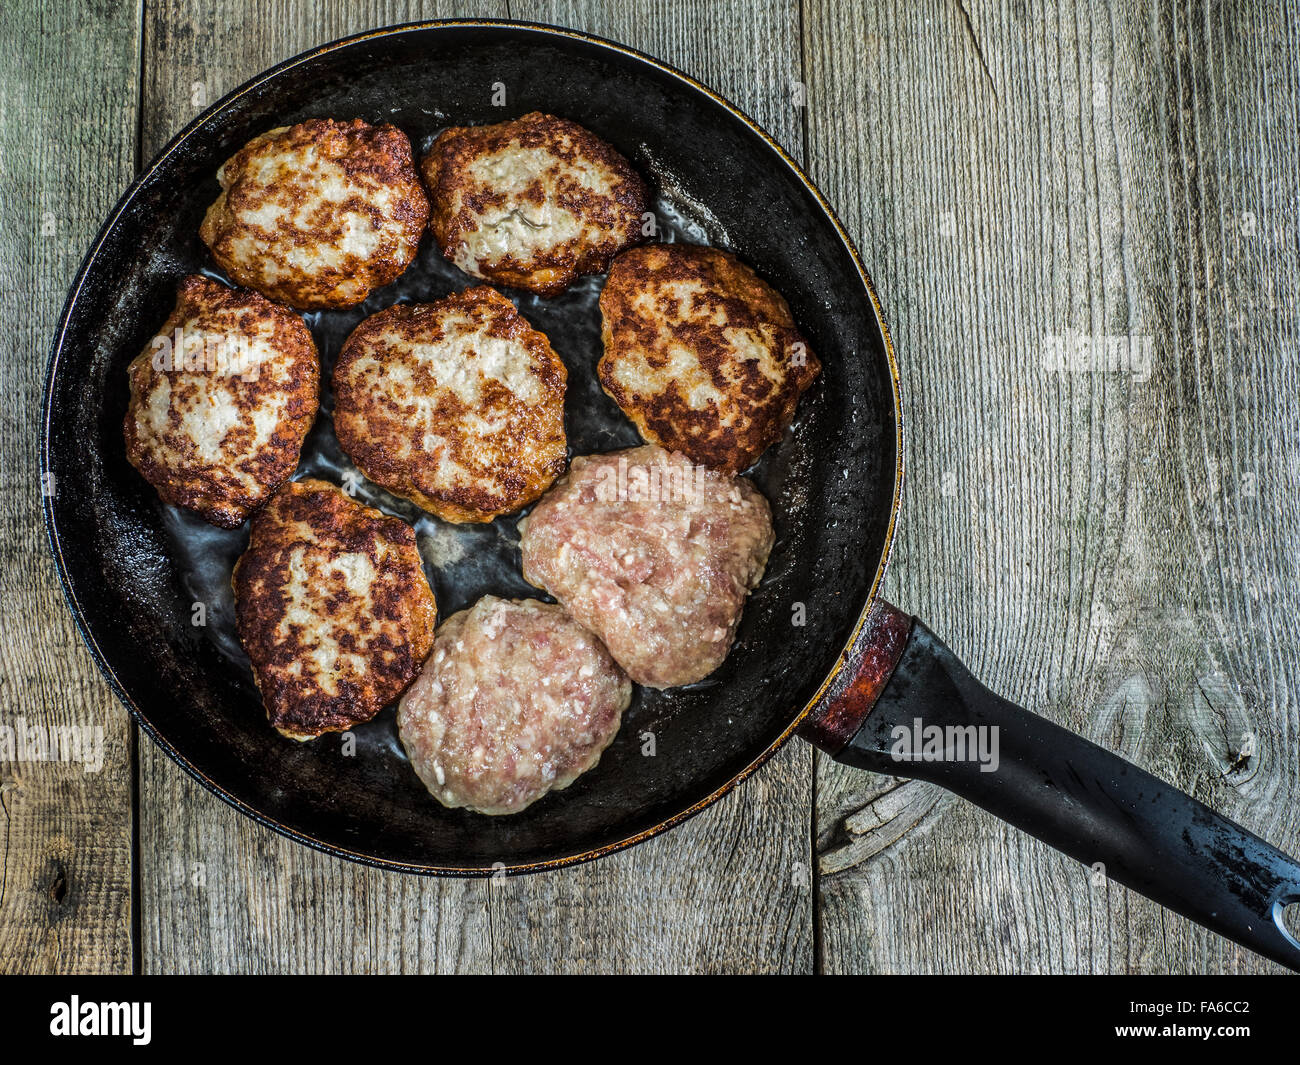 Overhead view of meat patties on a frying pan Stock Photo